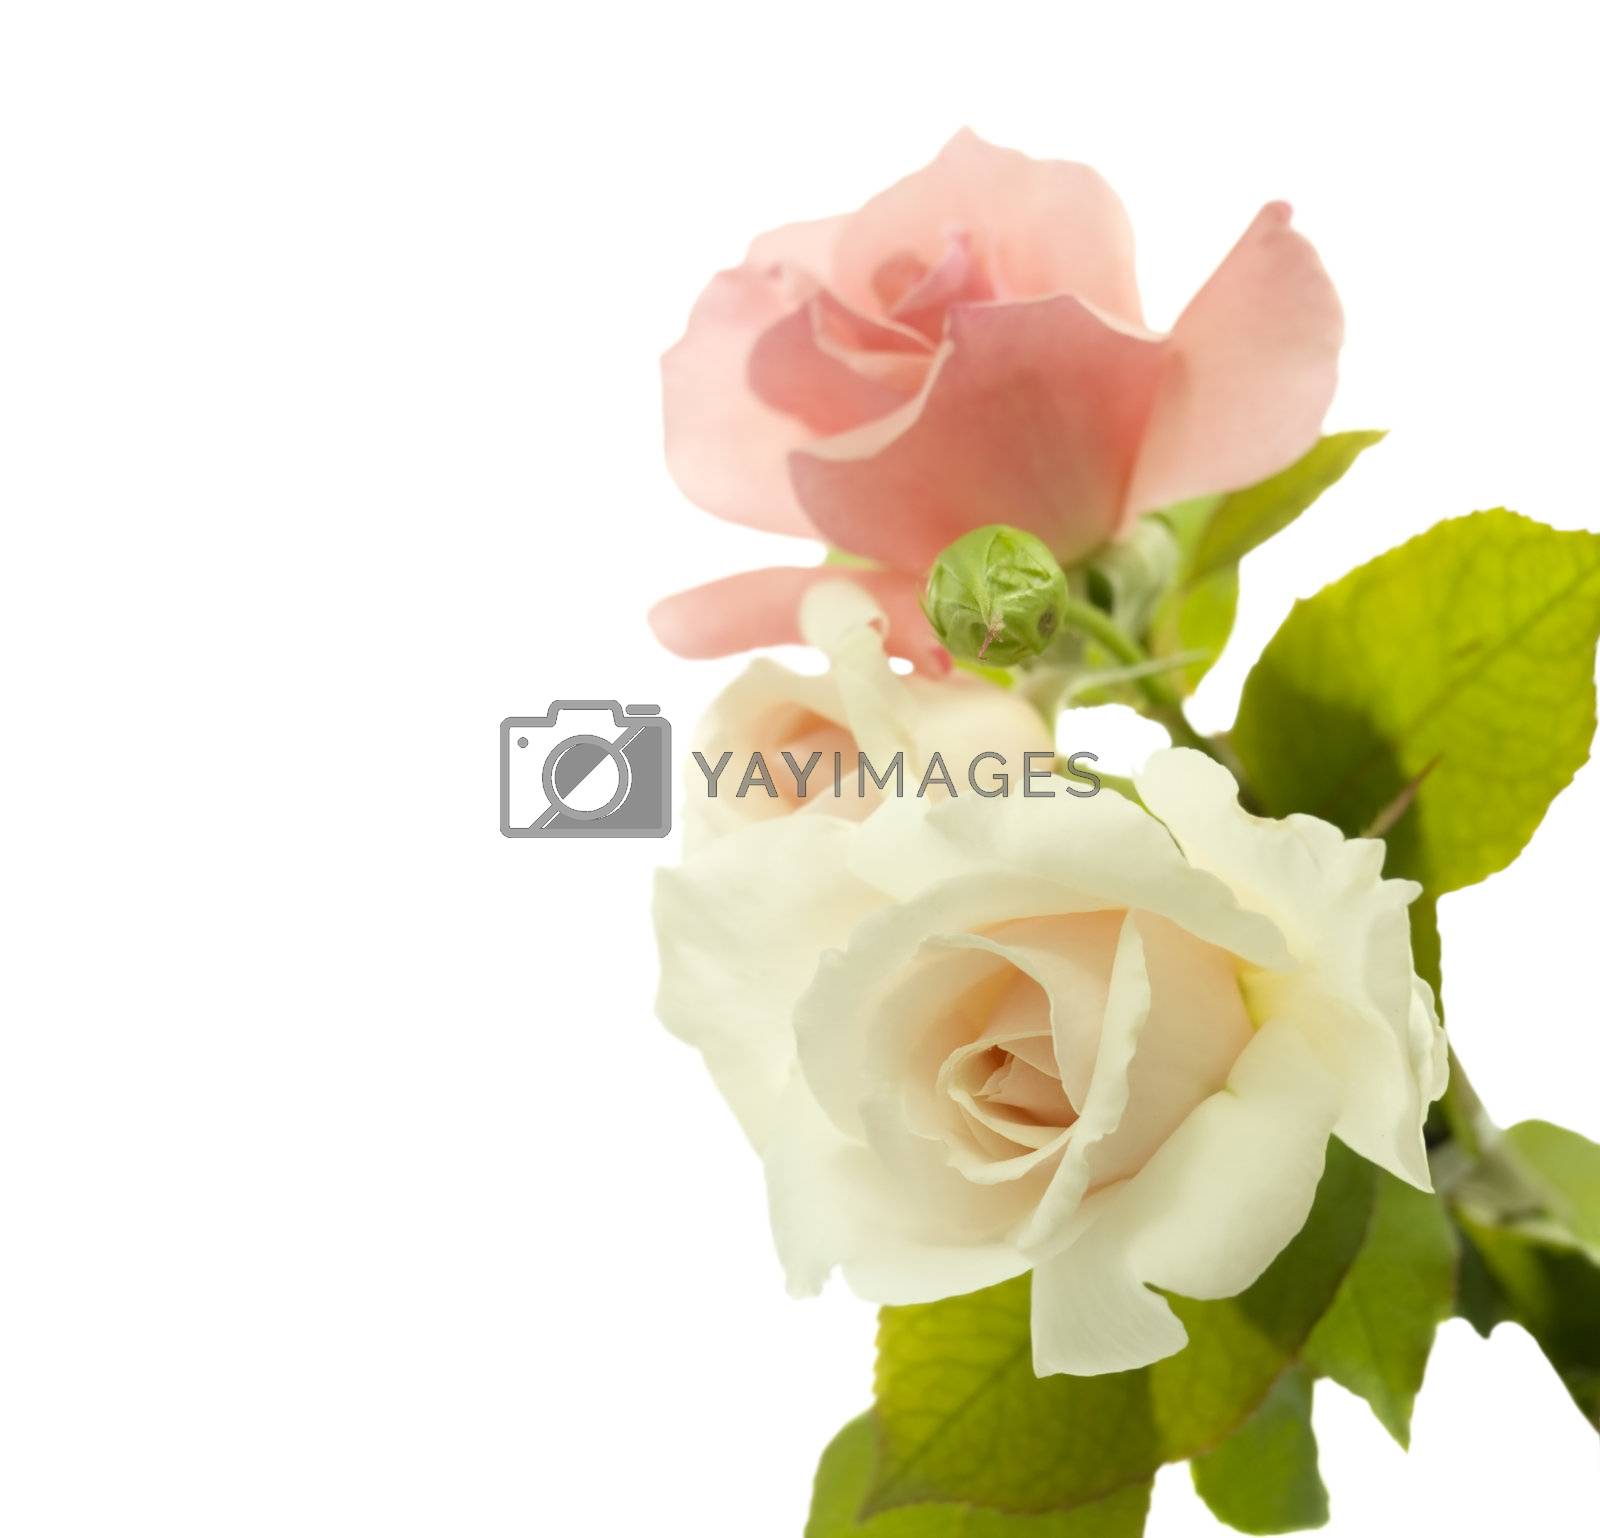 Valentine Rose Flowers Border Royalty Free Stock Image Stock Photos Royalty Free Images Vectors Footage Yayimages